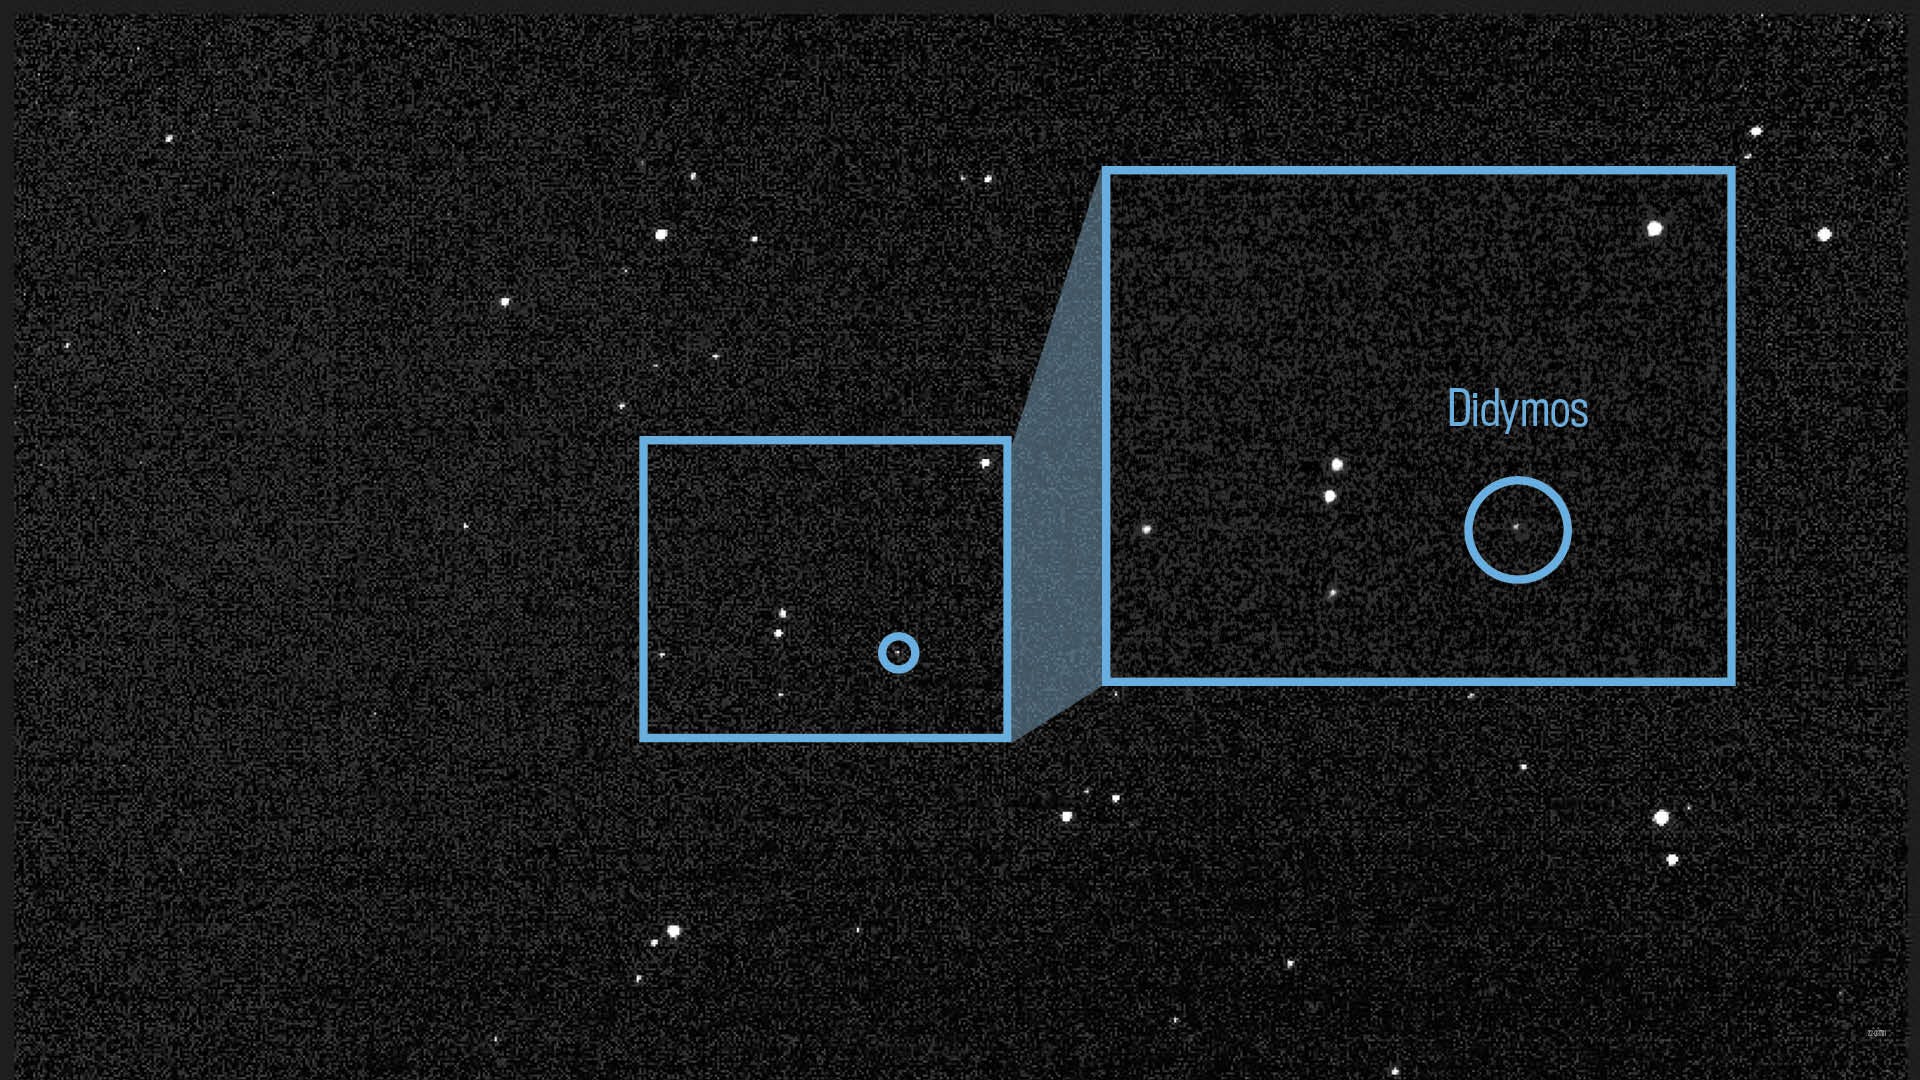 Starry black background of space with small dot of light highlighted as the Didymos asteroid system.